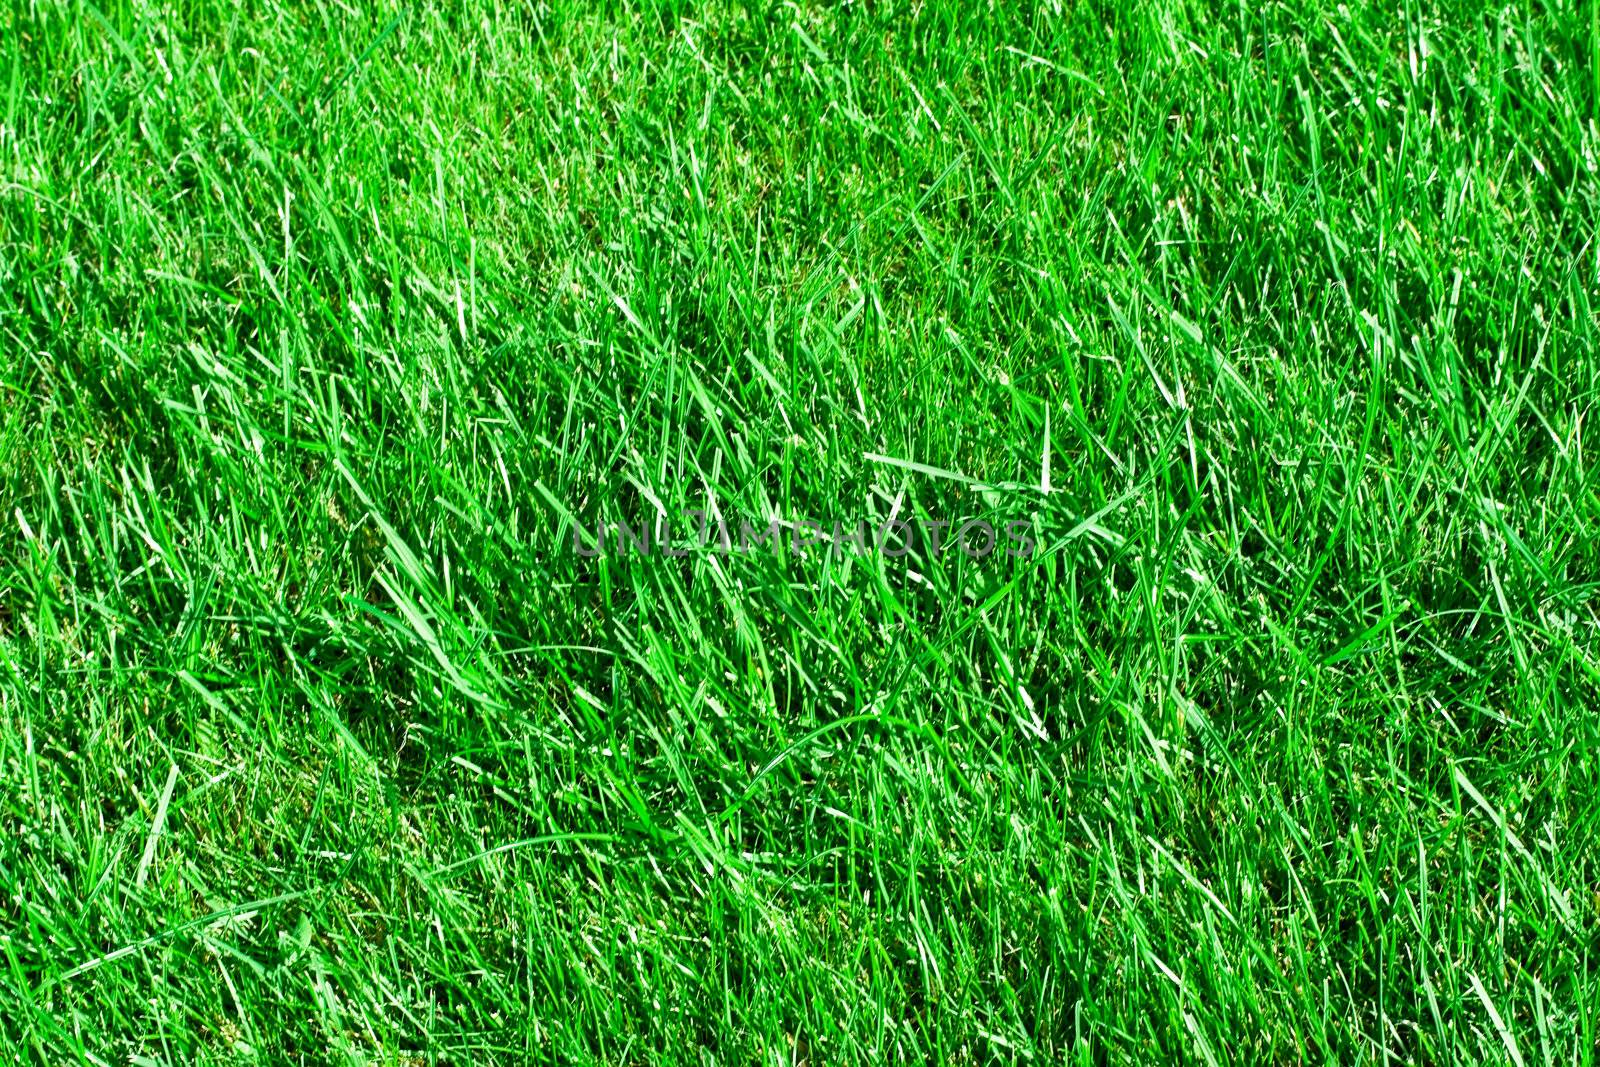  Green lawn. it can be used as background